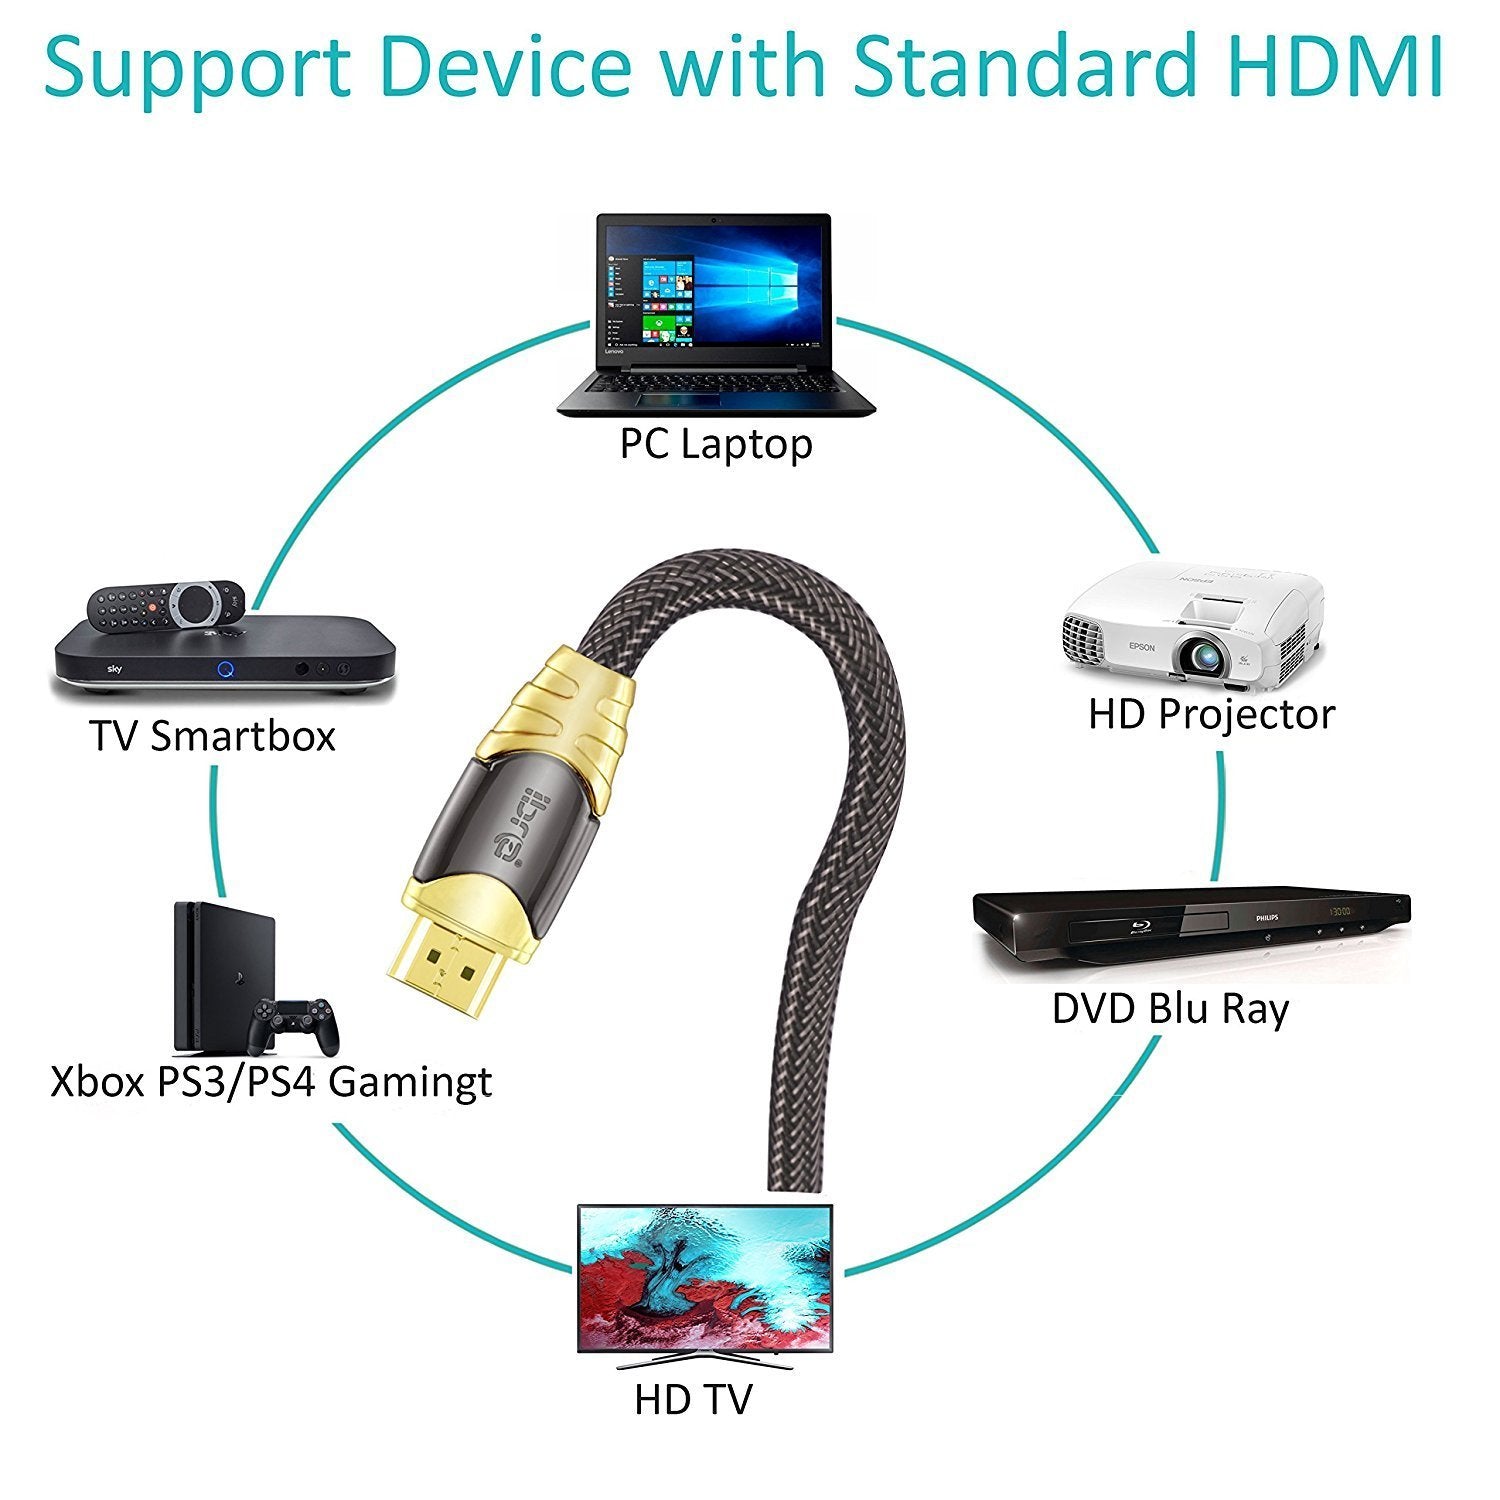 HDMI Cable 8M - HDMI 2.0 (4K@60Hz) Ready - 28AWG Braided Cord - 18Gbps -Gold Plated Connectors - Ethernet, Audio Return - Video 4K 2160p HD 1080p 3D Xbox PlayStation PS3 PS4 PC Apple TV – IBRA LUXURY